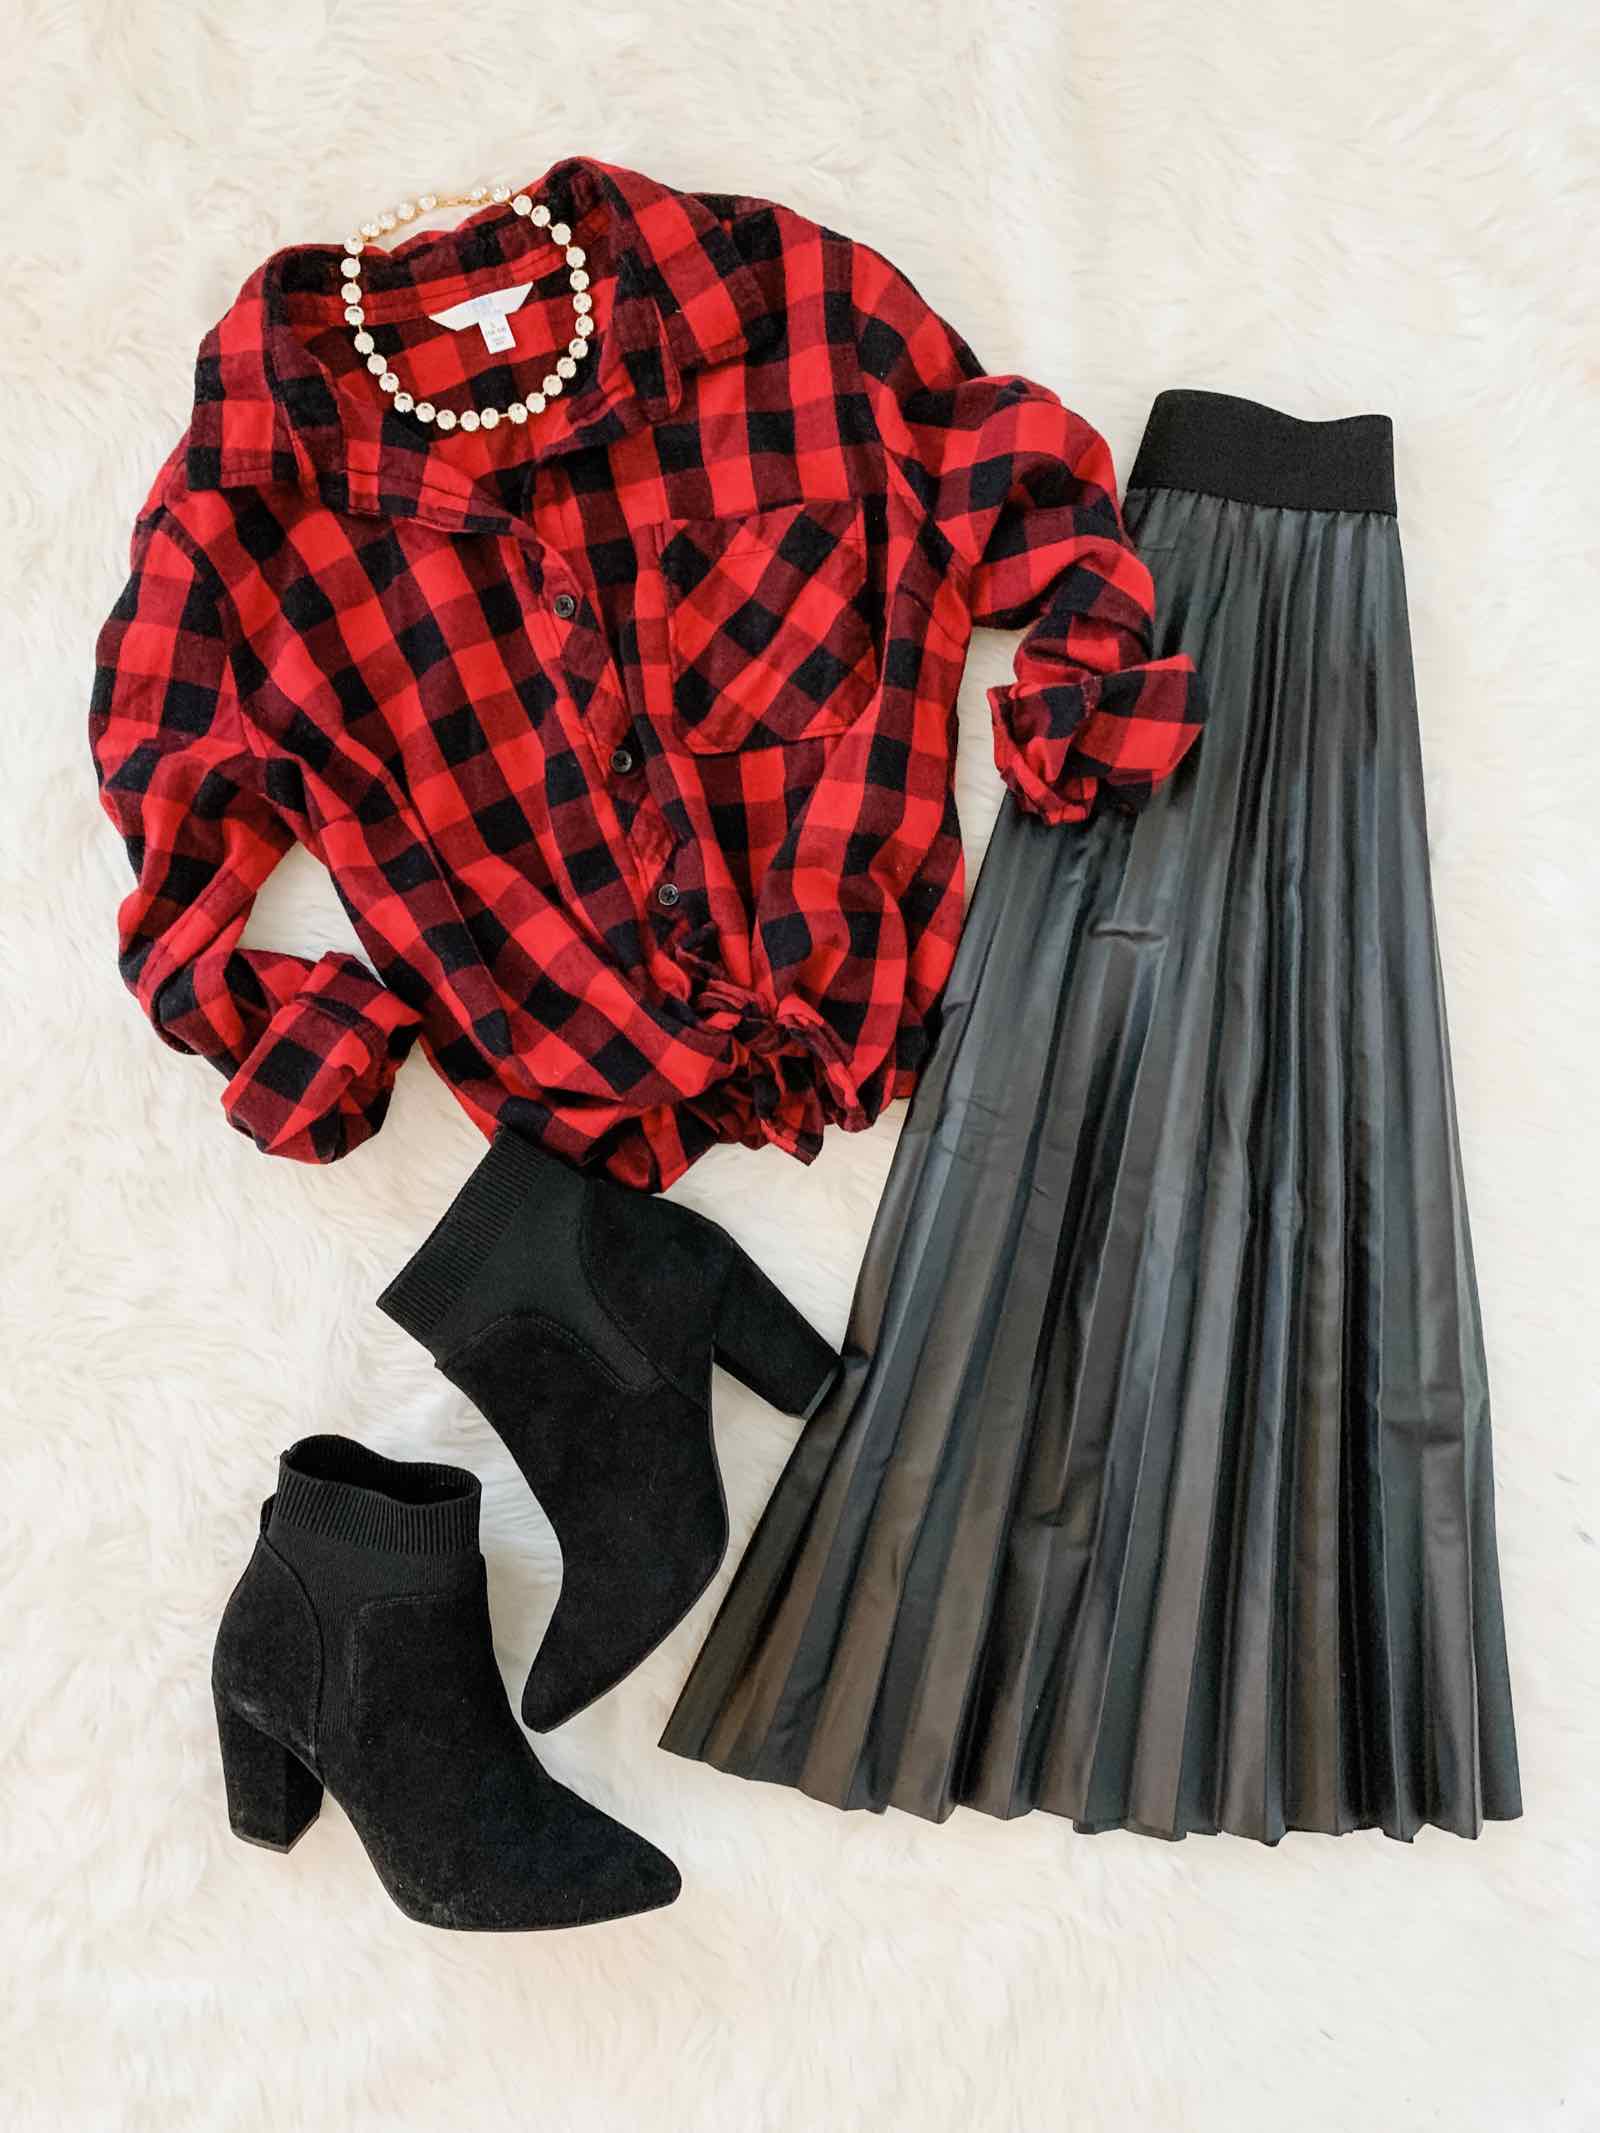 This luxe holiday look is just $52 TOTAL at Walmart!